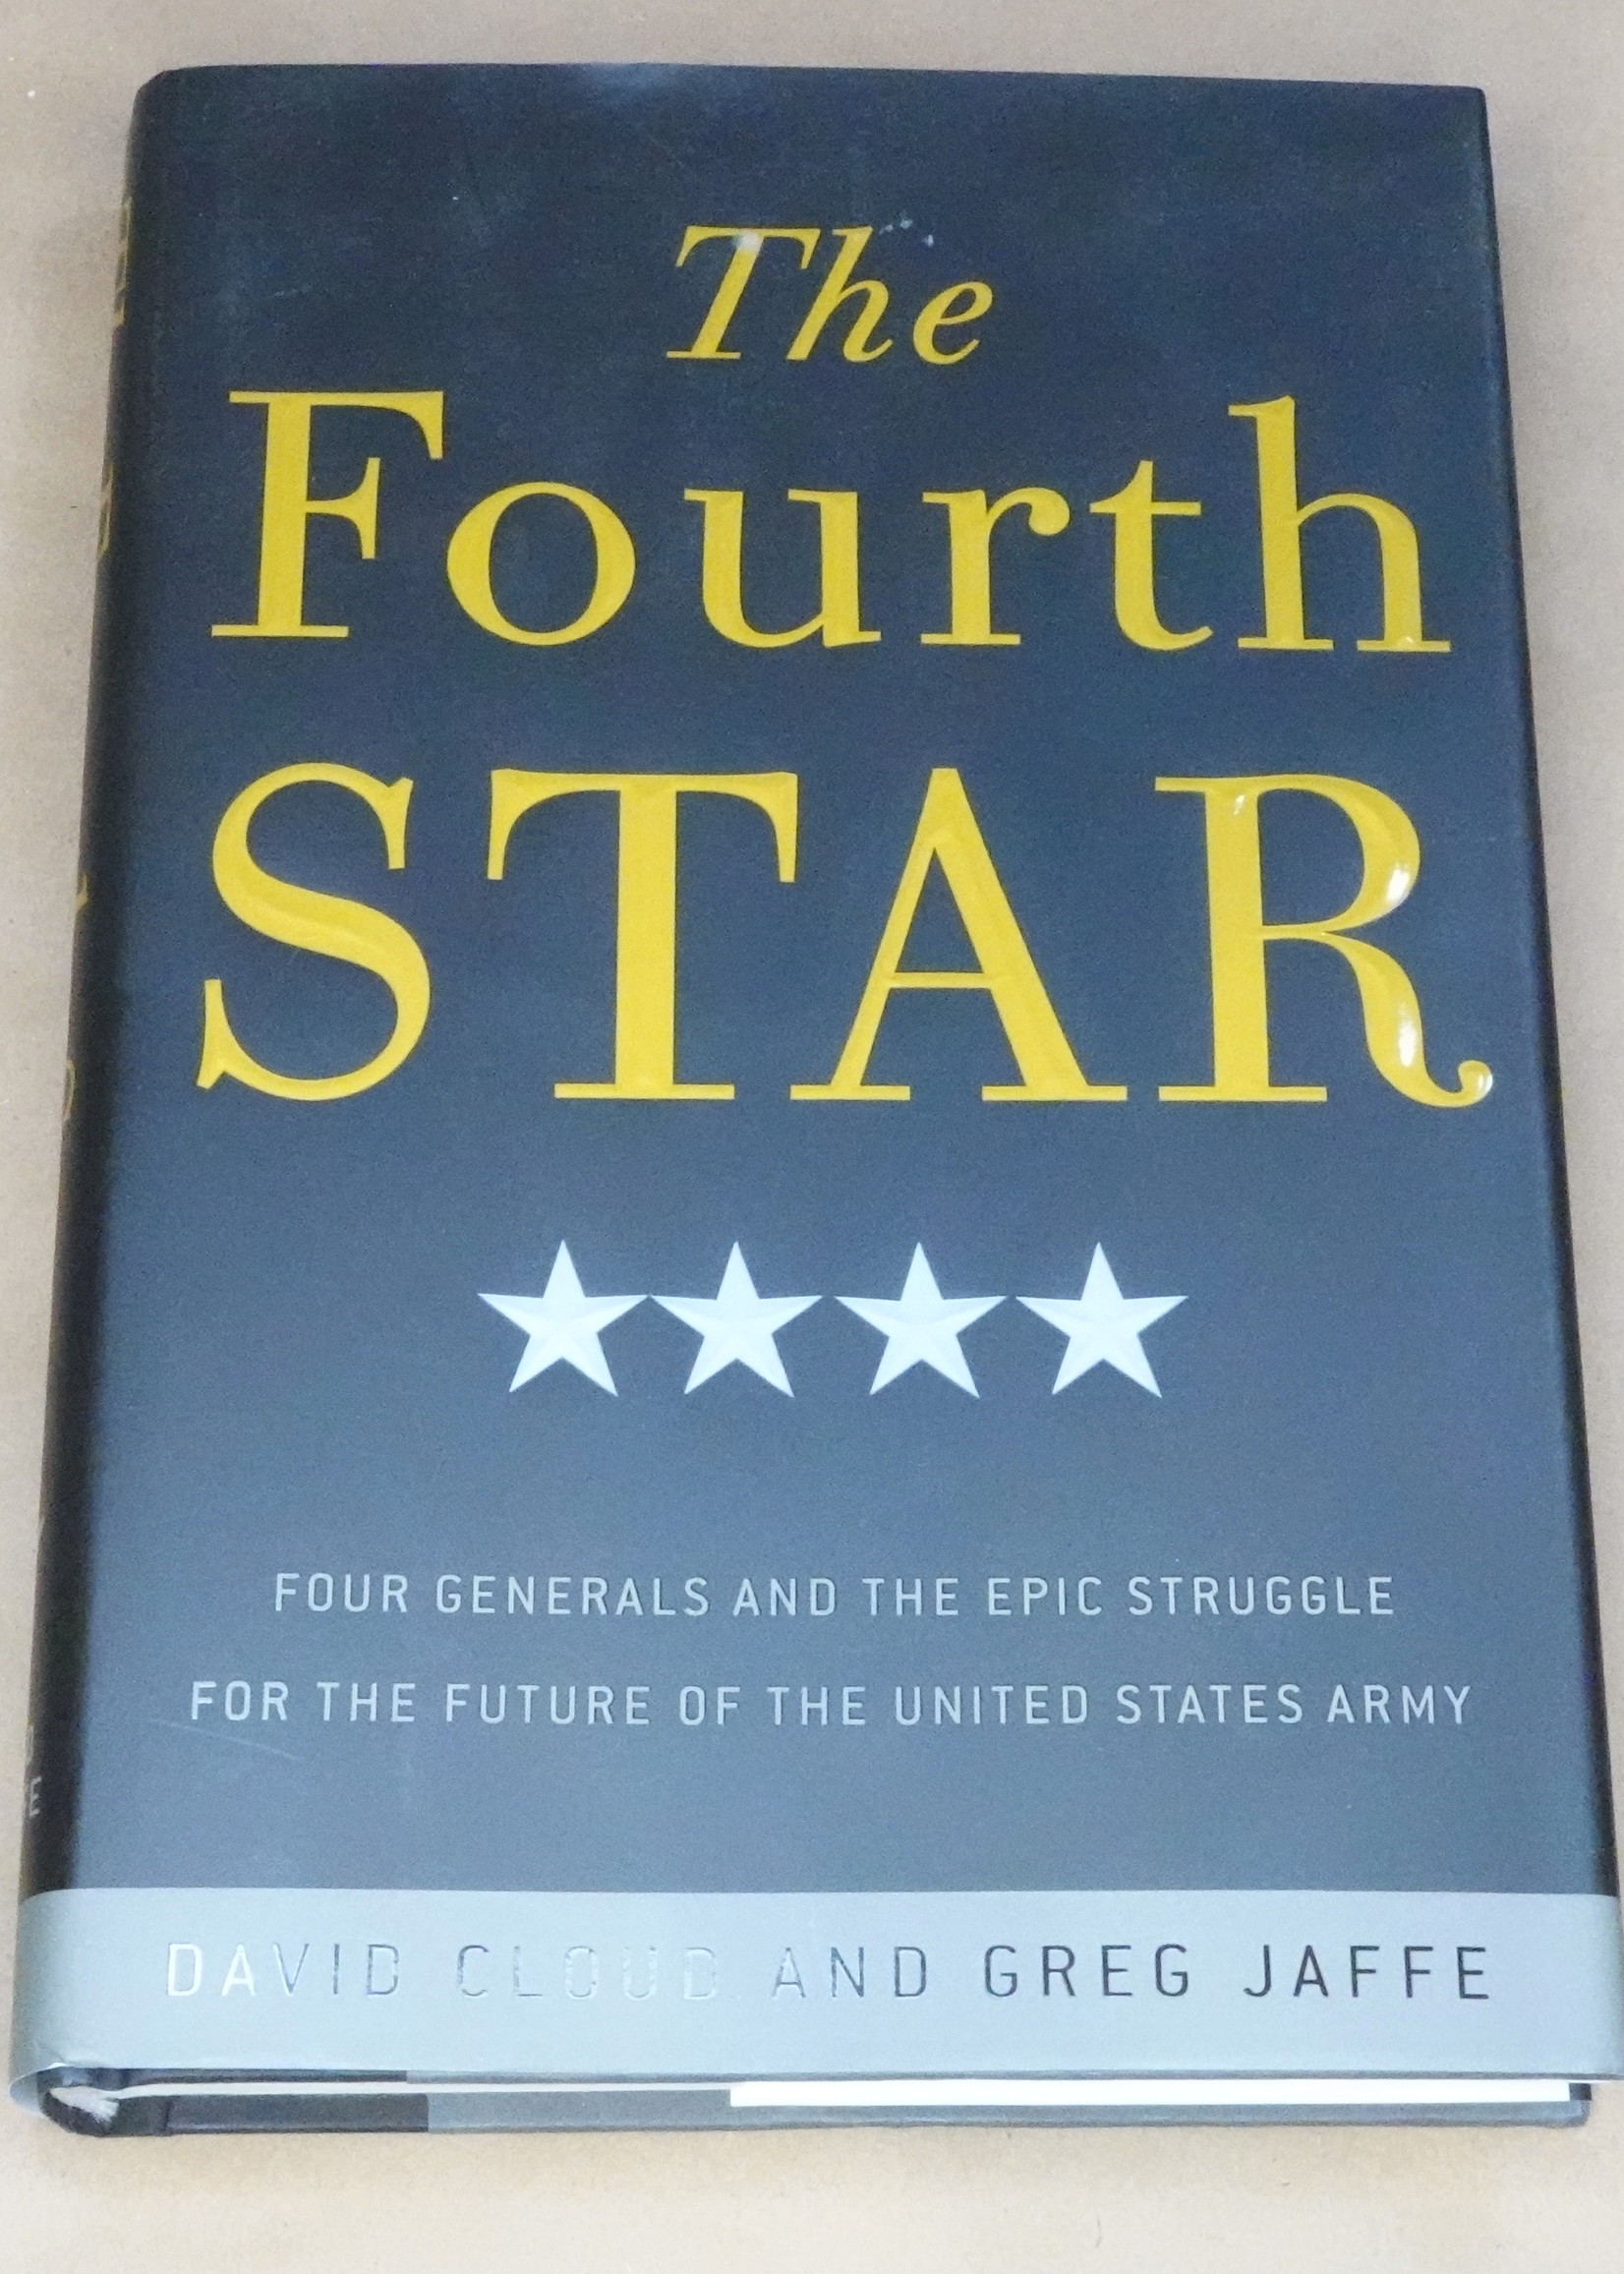 Crown The Fourth Star: Four Generals and the Epic Struggle for the Future of the United States Army